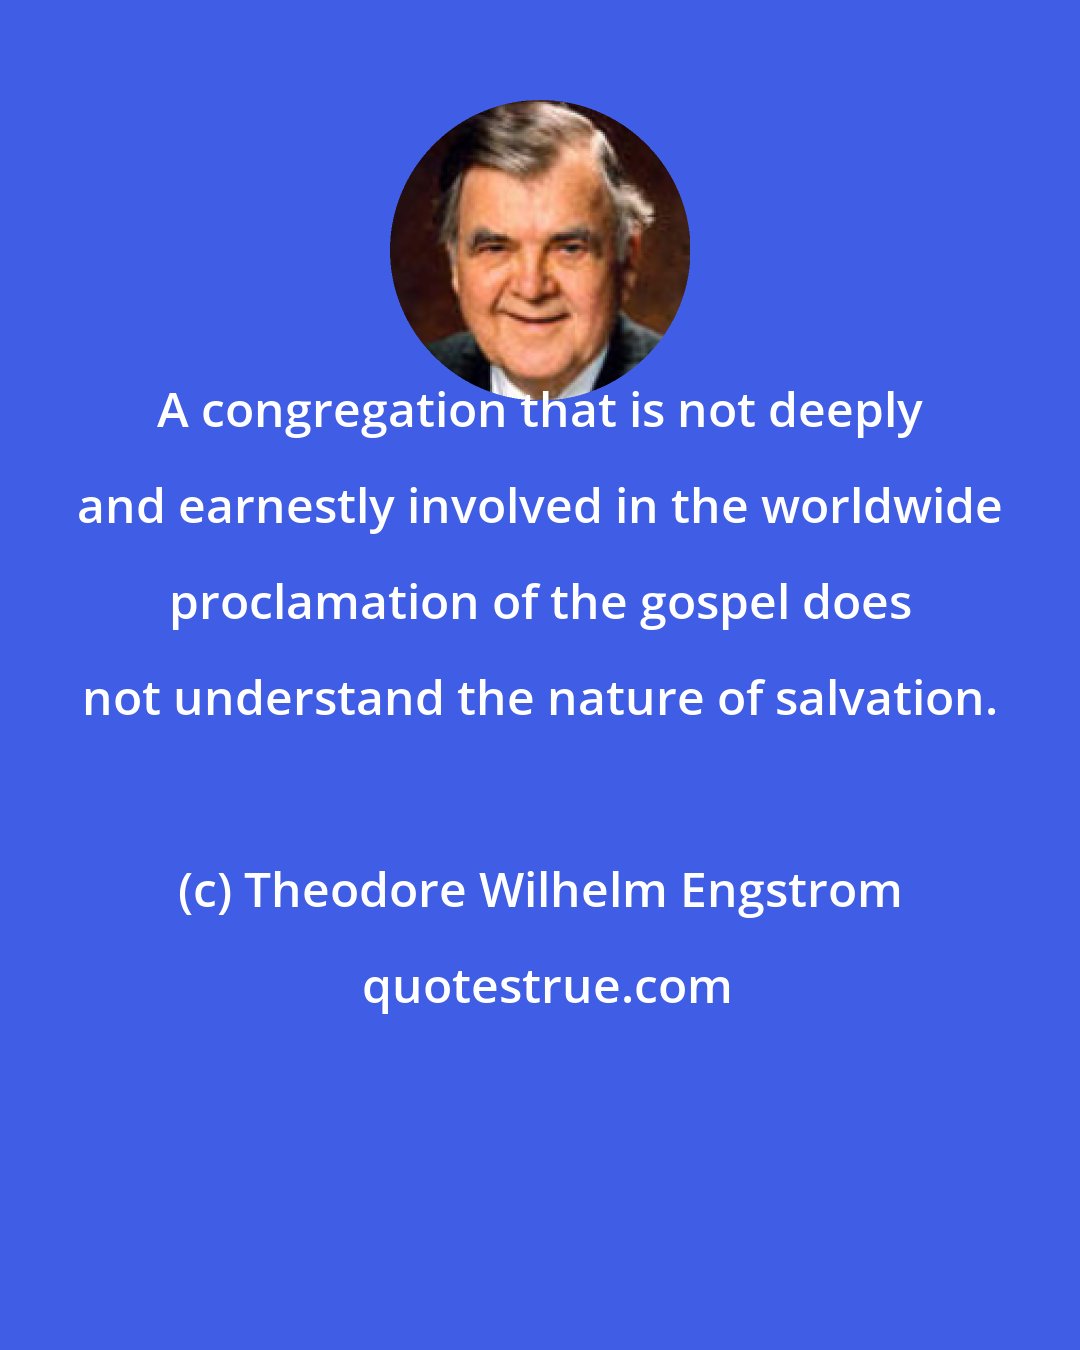 Theodore Wilhelm Engstrom: A congregation that is not deeply and earnestly involved in the worldwide proclamation of the gospel does not understand the nature of salvation.